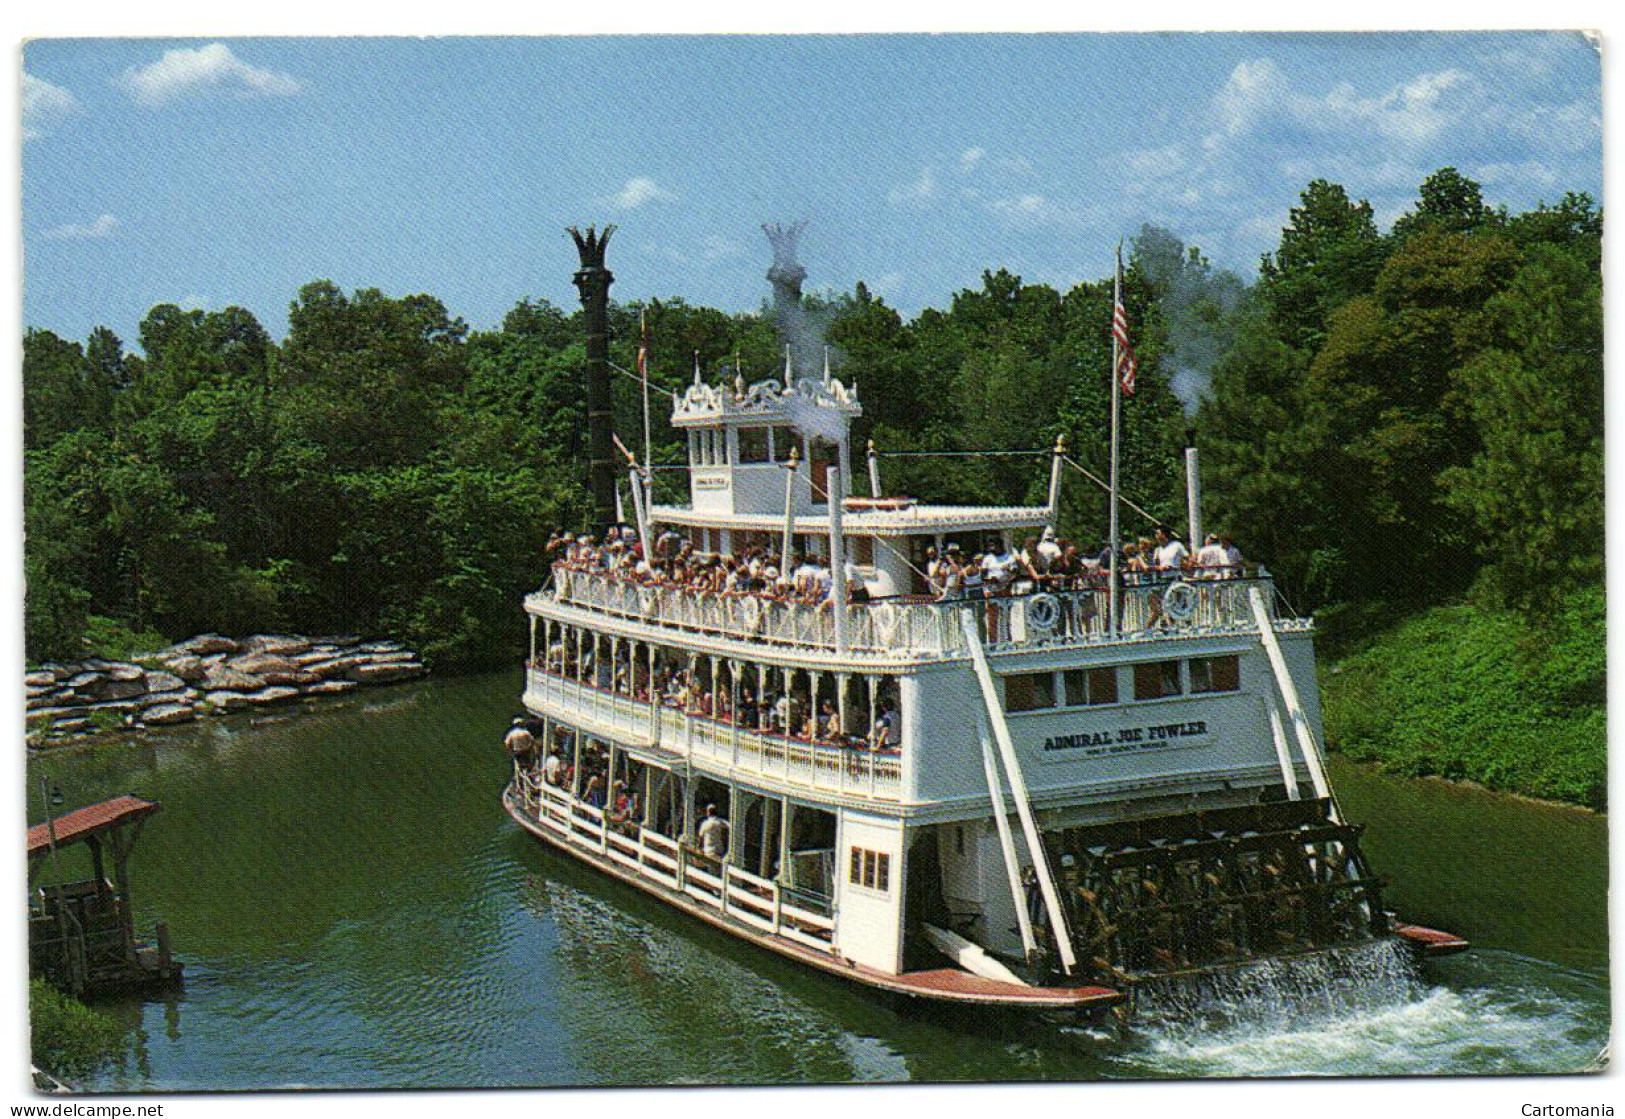 The Rivers Of America - The Majestic Admiral Joe Fowler An Authentic Mississippi Sternwheelers - Disneyworld